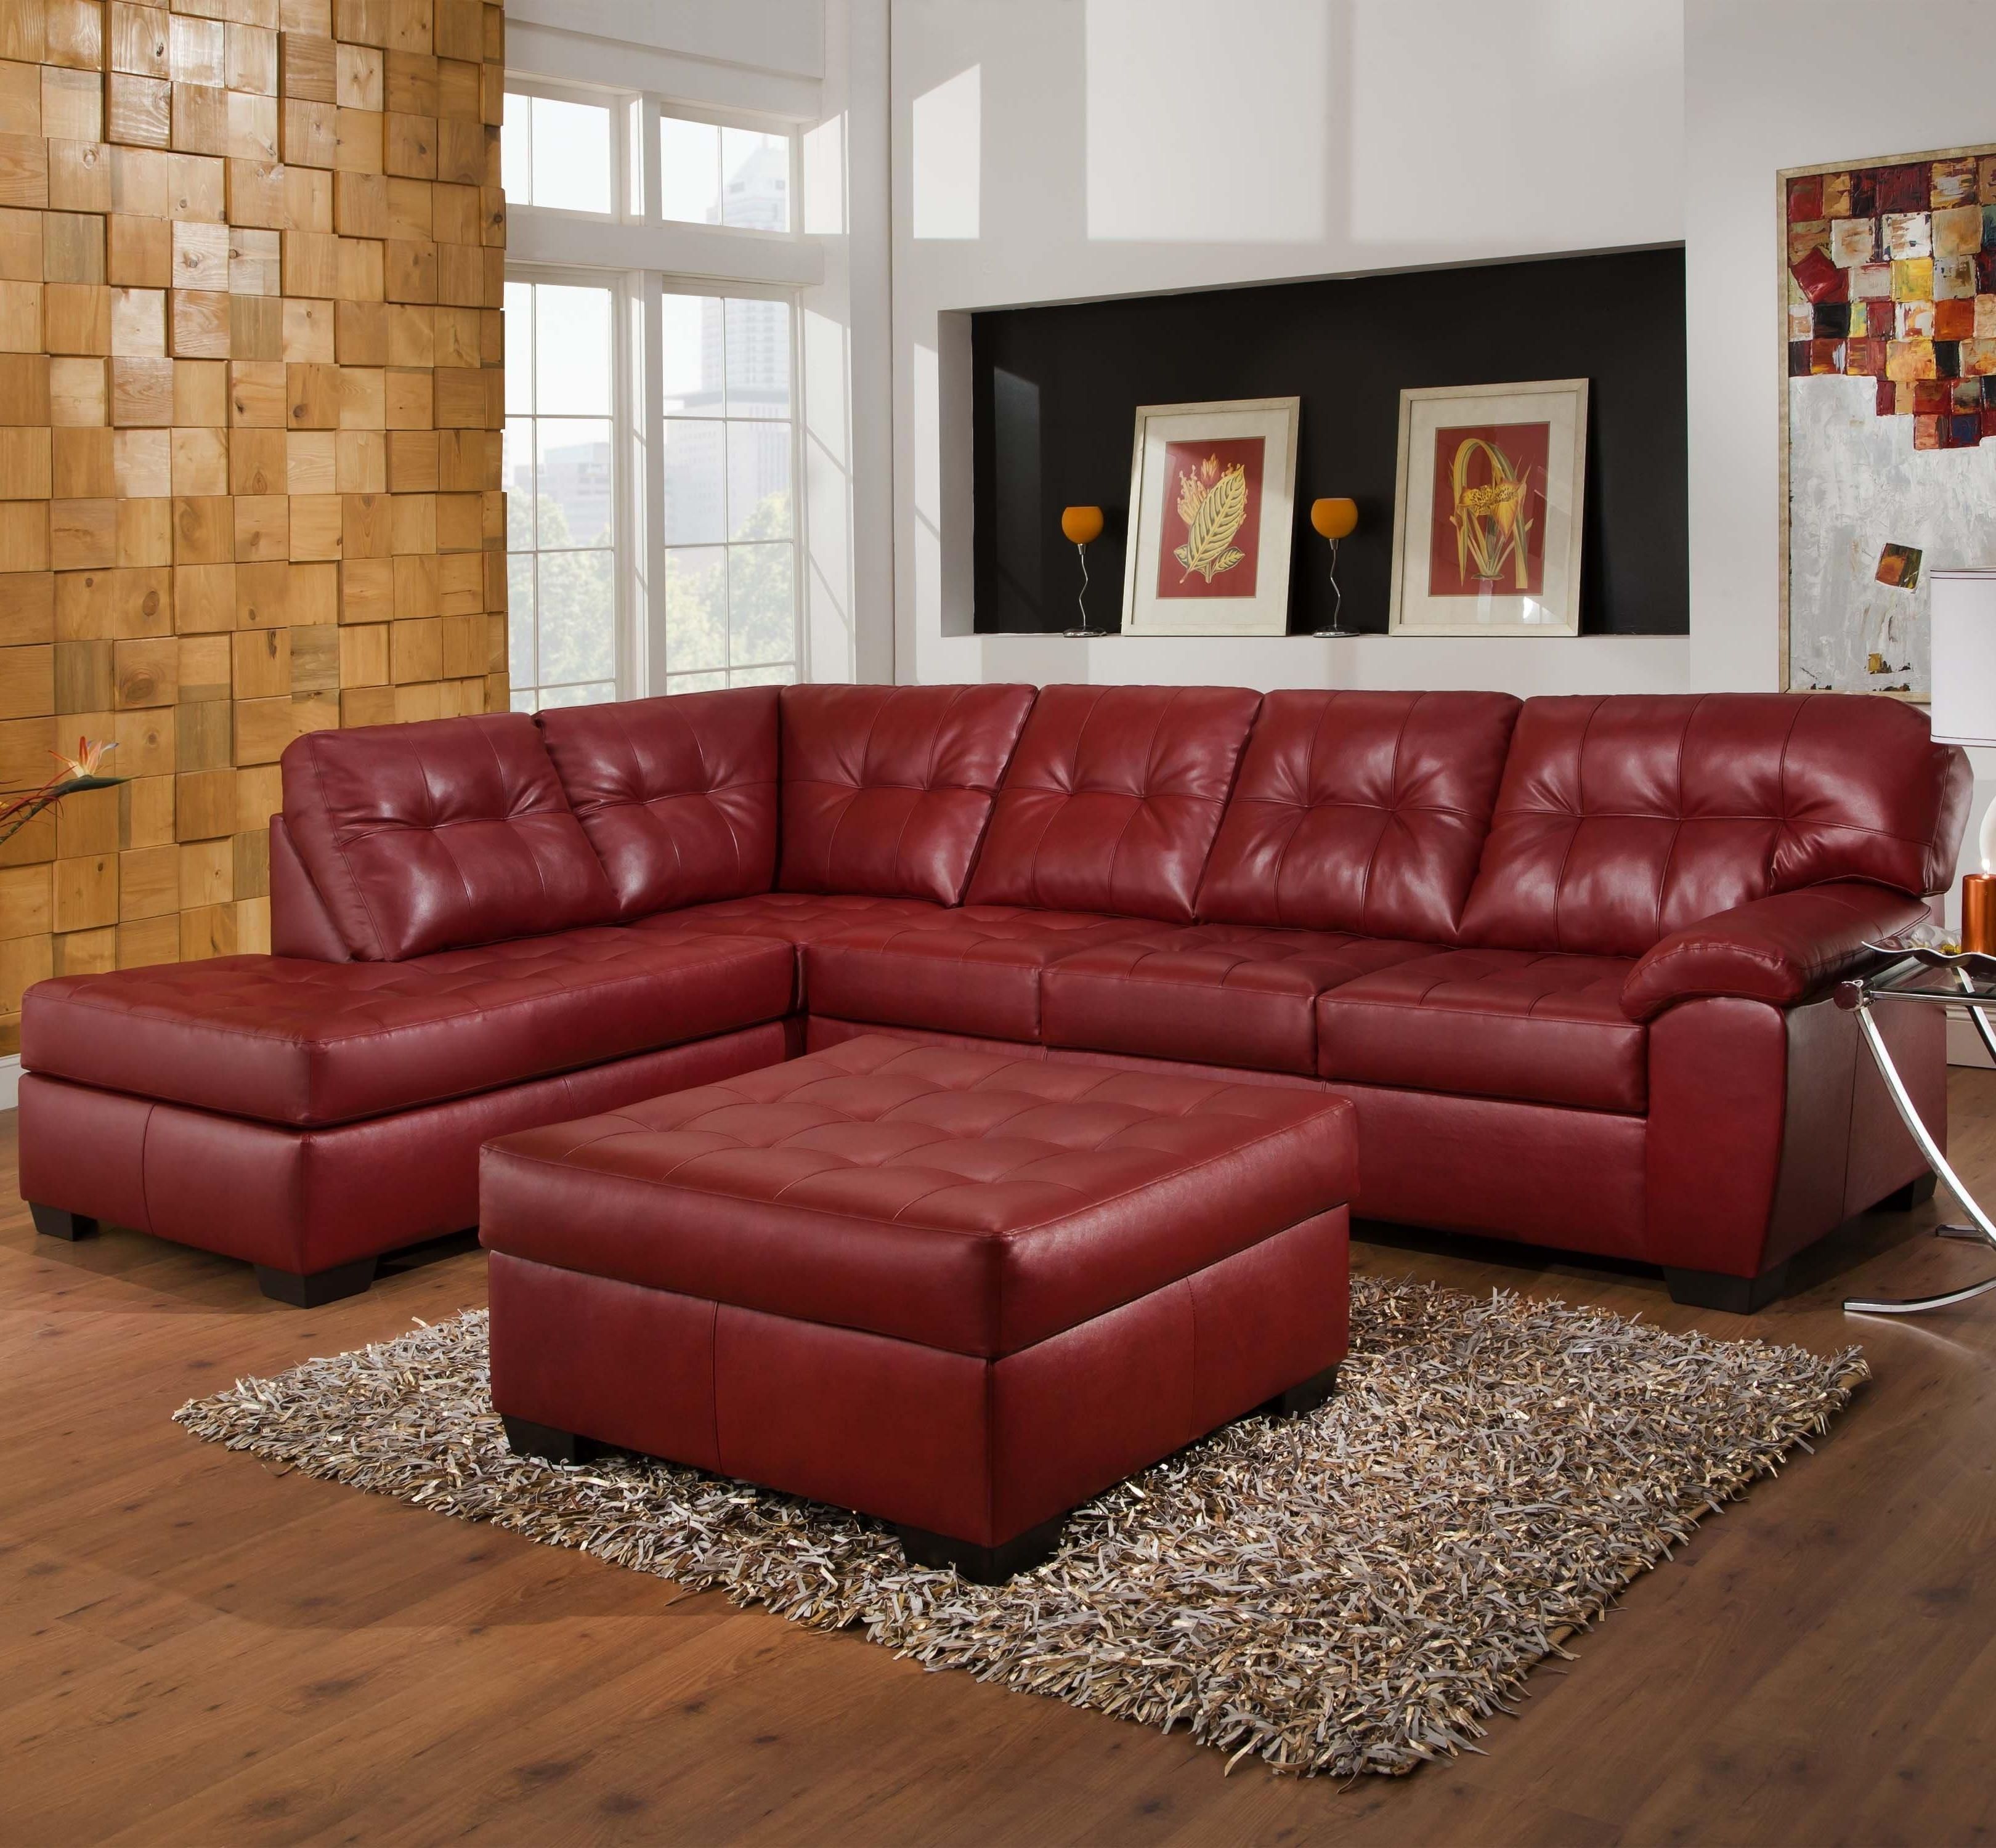 Grand Rapids Mi Sectional Sofas Within Trendy 9569 2 Piece Sectional With Tufted Seats & Backsimmons (View 13 of 15)